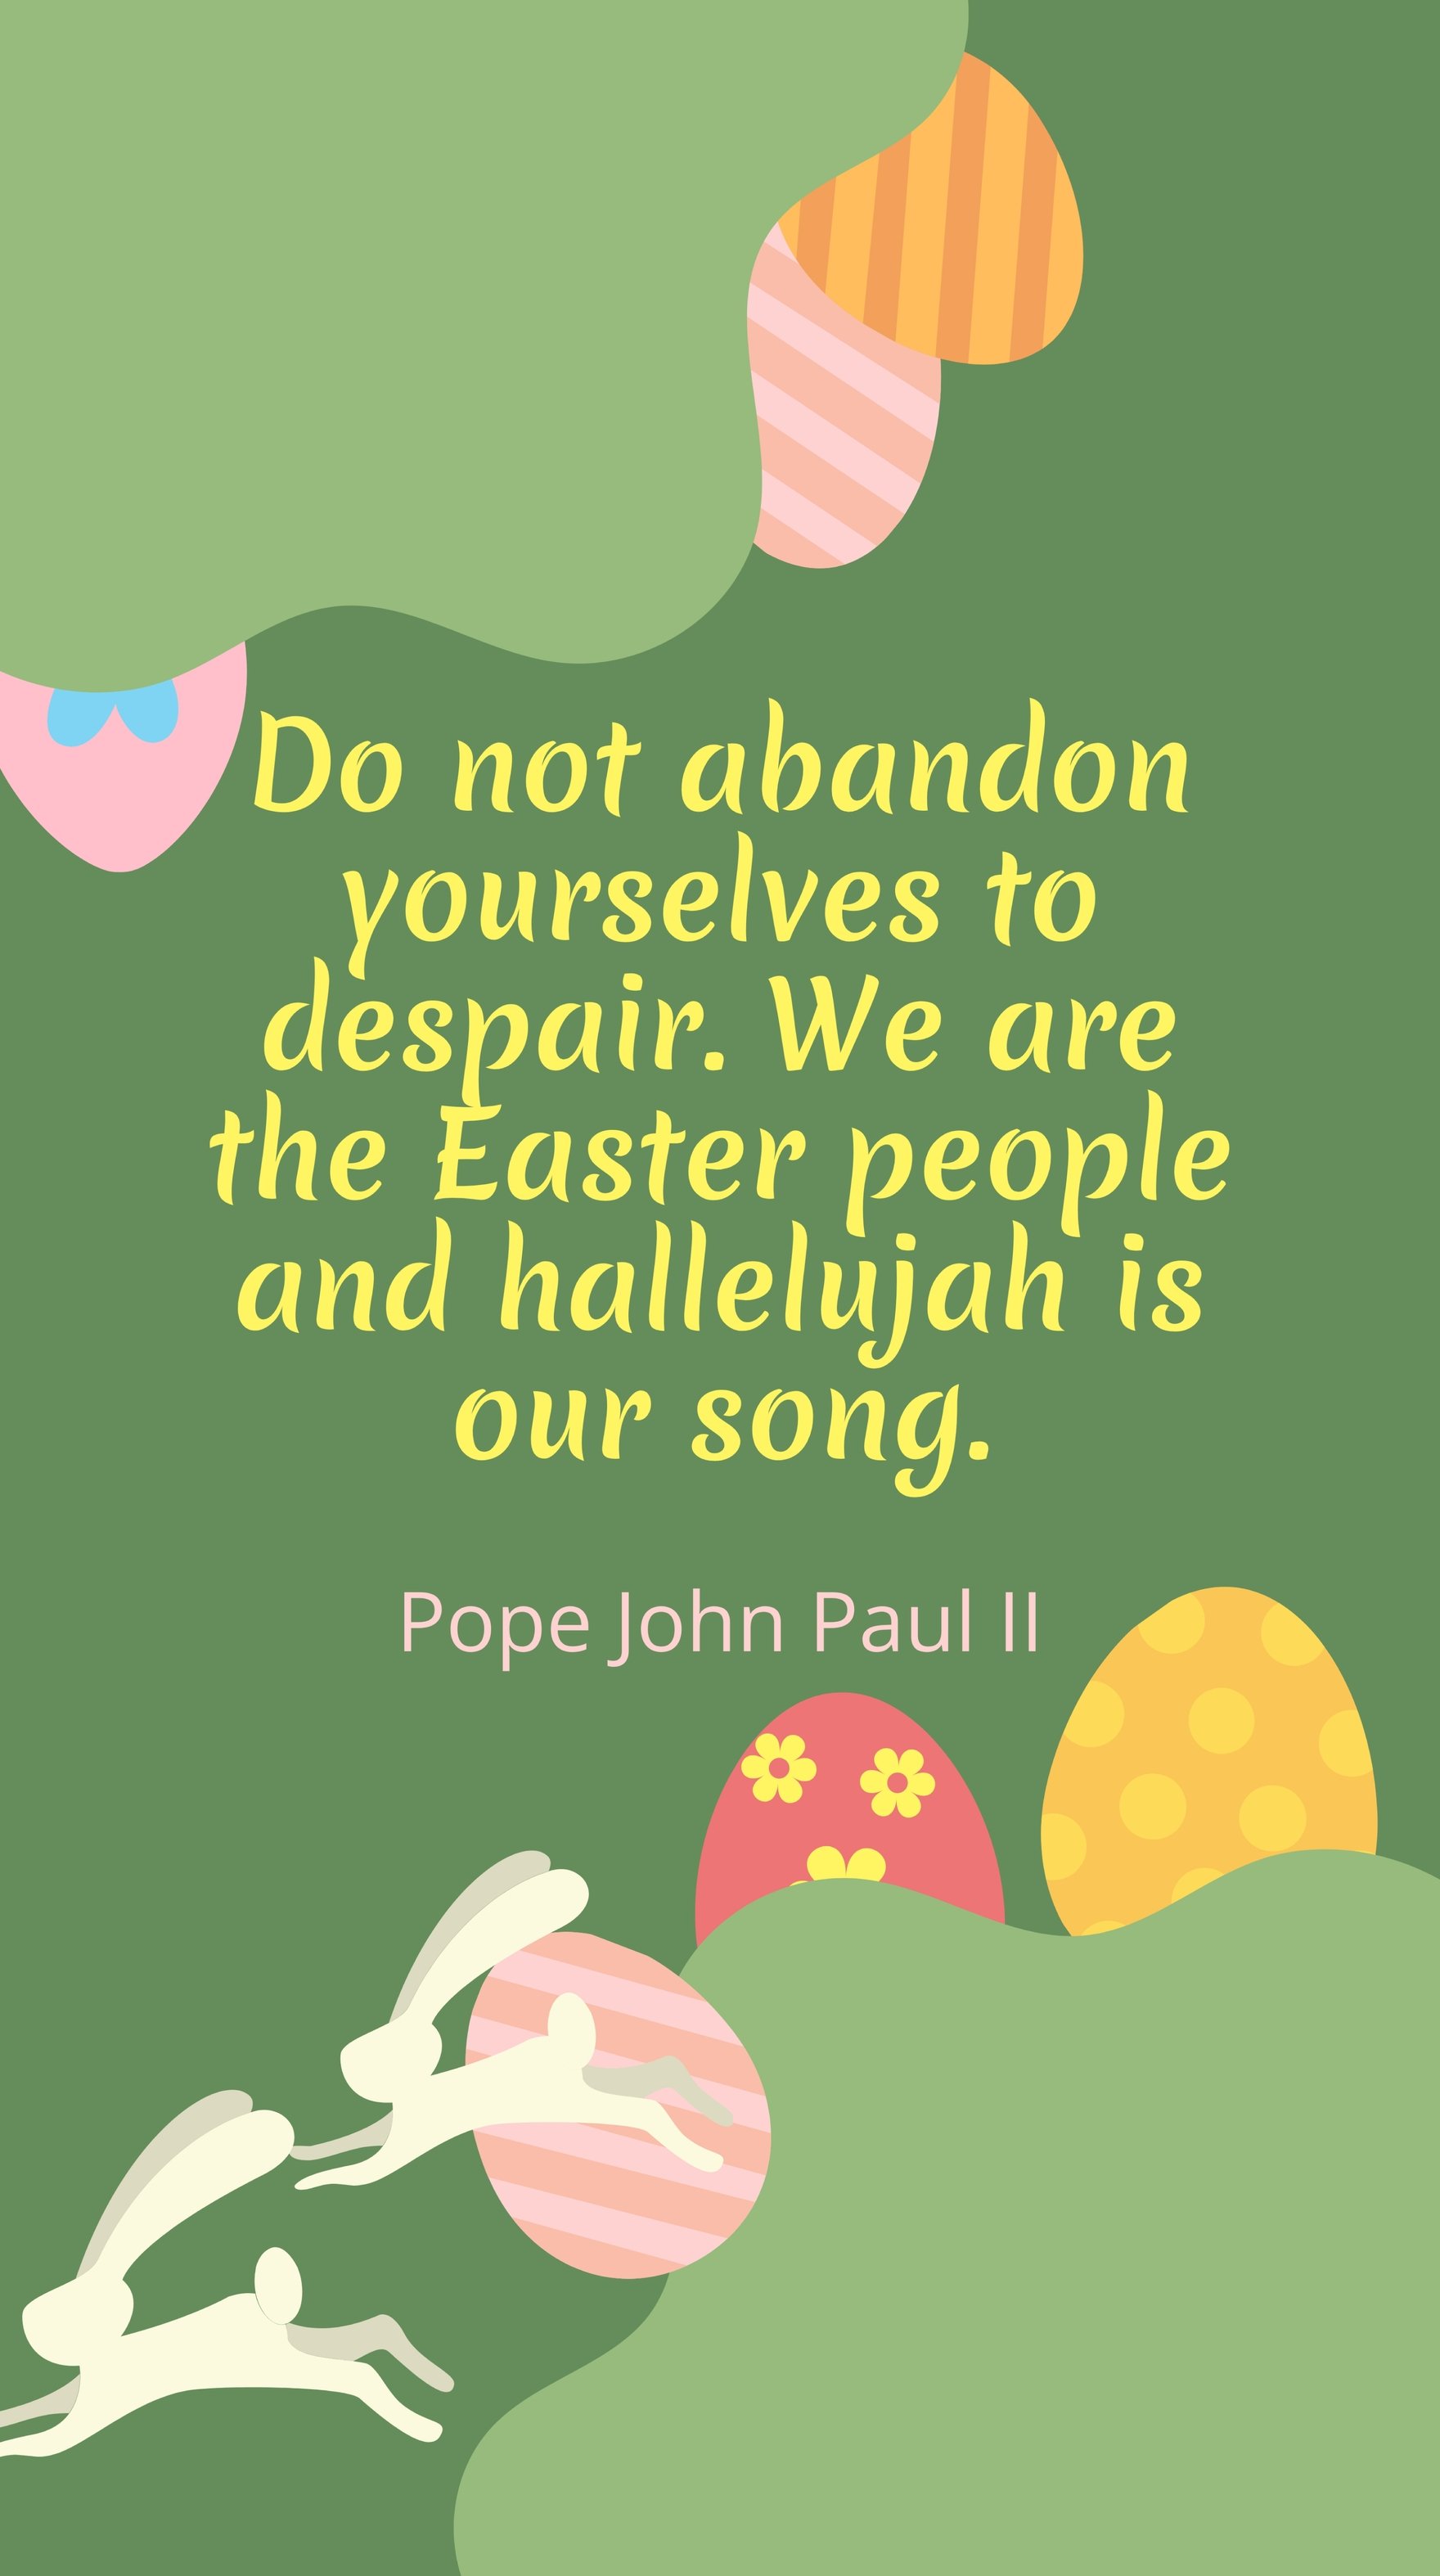 Pope John Paul II - Do not abandon yourselves to despair. We are the Easter people and hallelujah is our song.